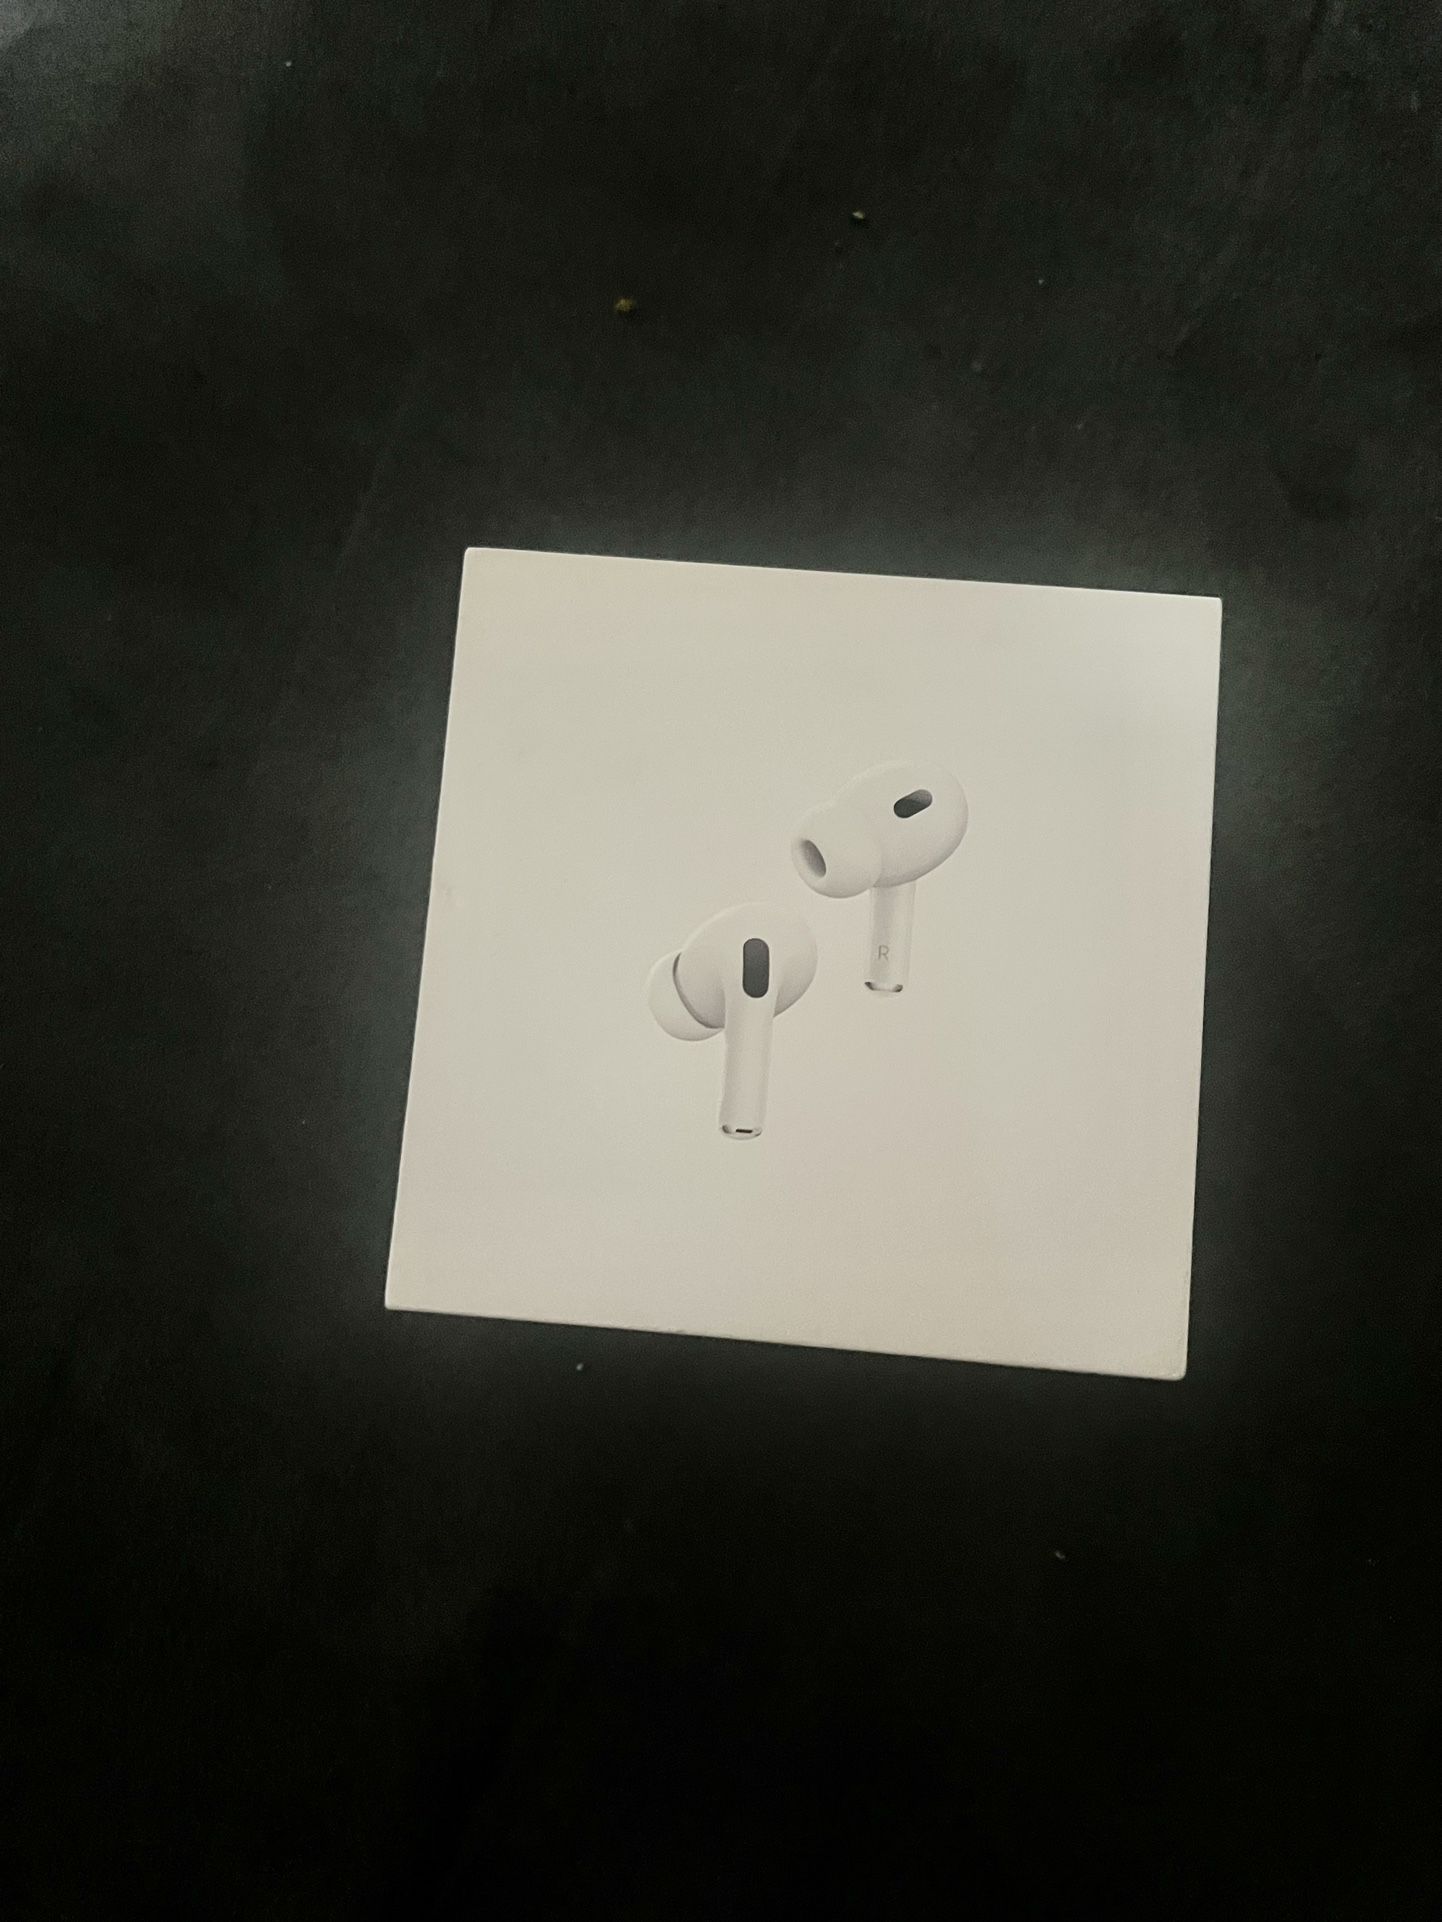 Apple Airpods Pro 2nd Generation-Sealed! Brand New!